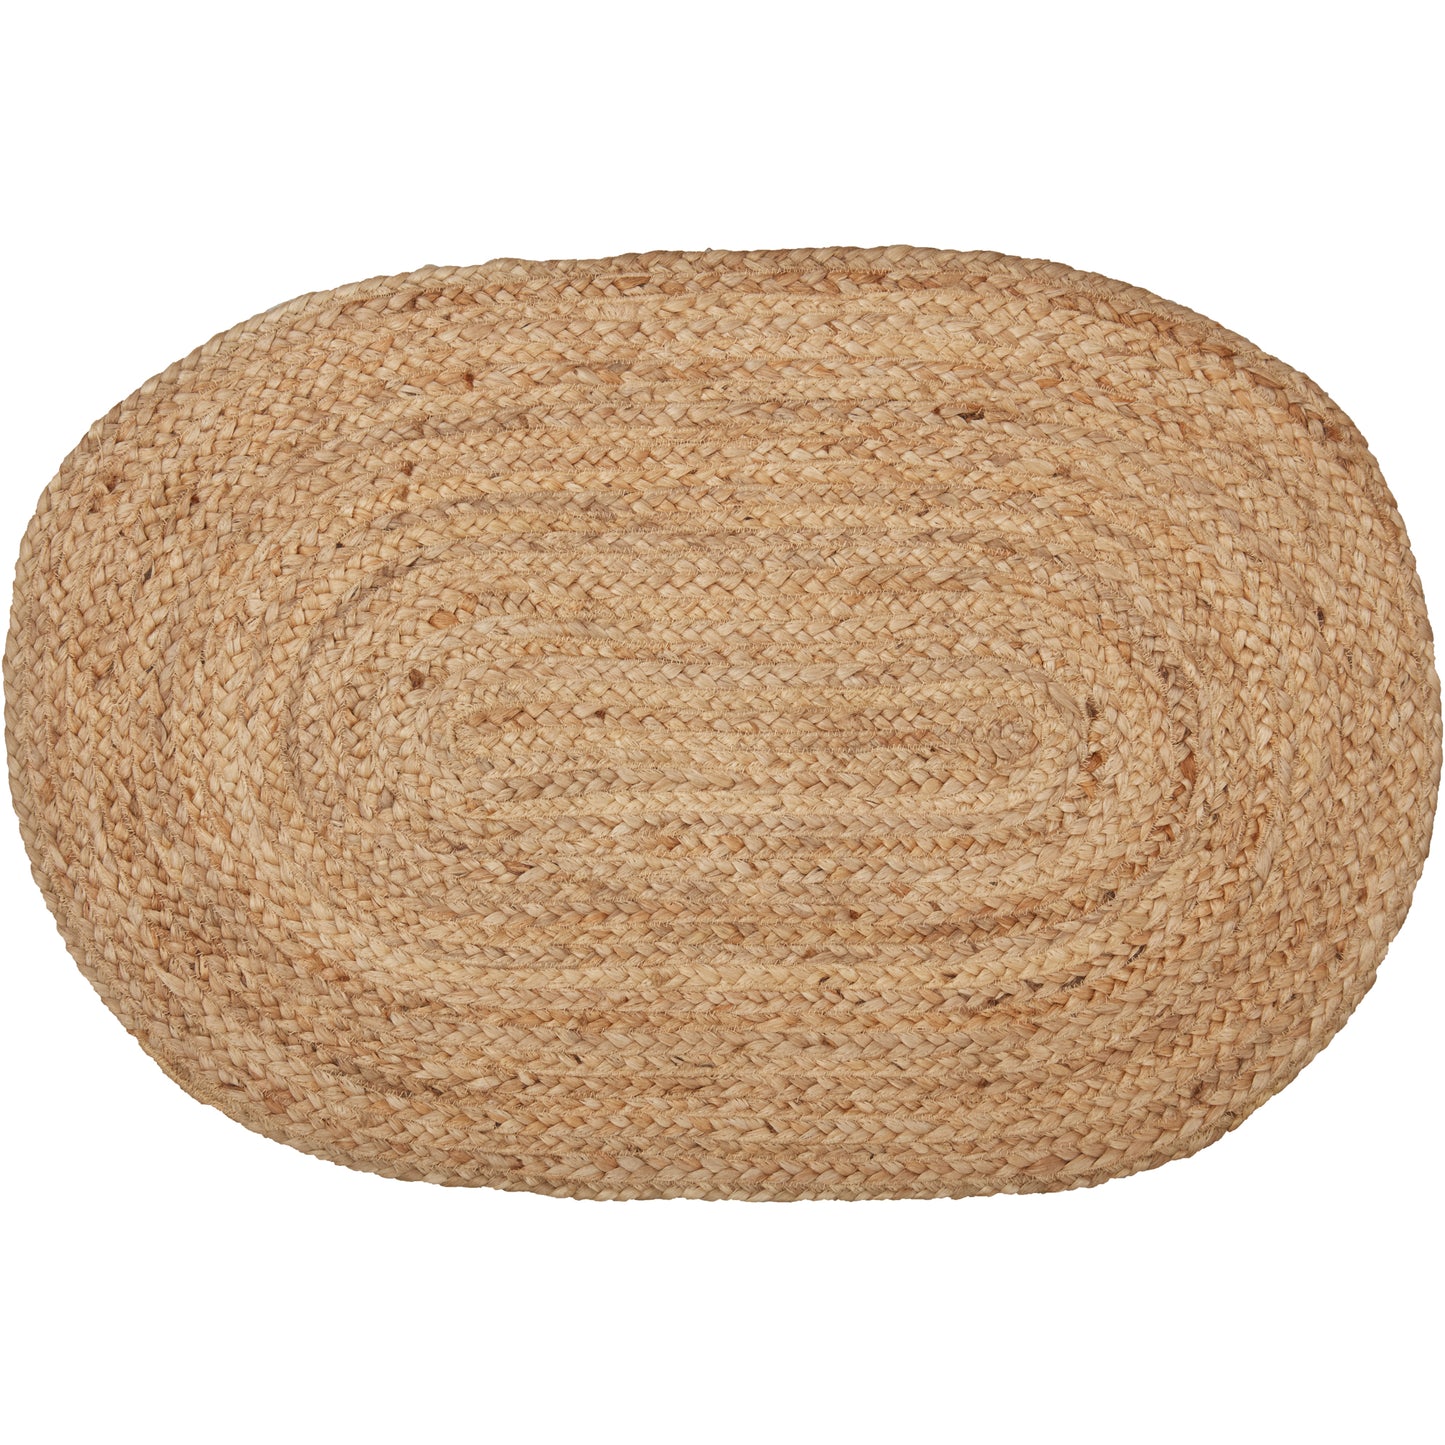 69384-Natural-Jute-Rug-Oval-w-Pad-20x30-image-2